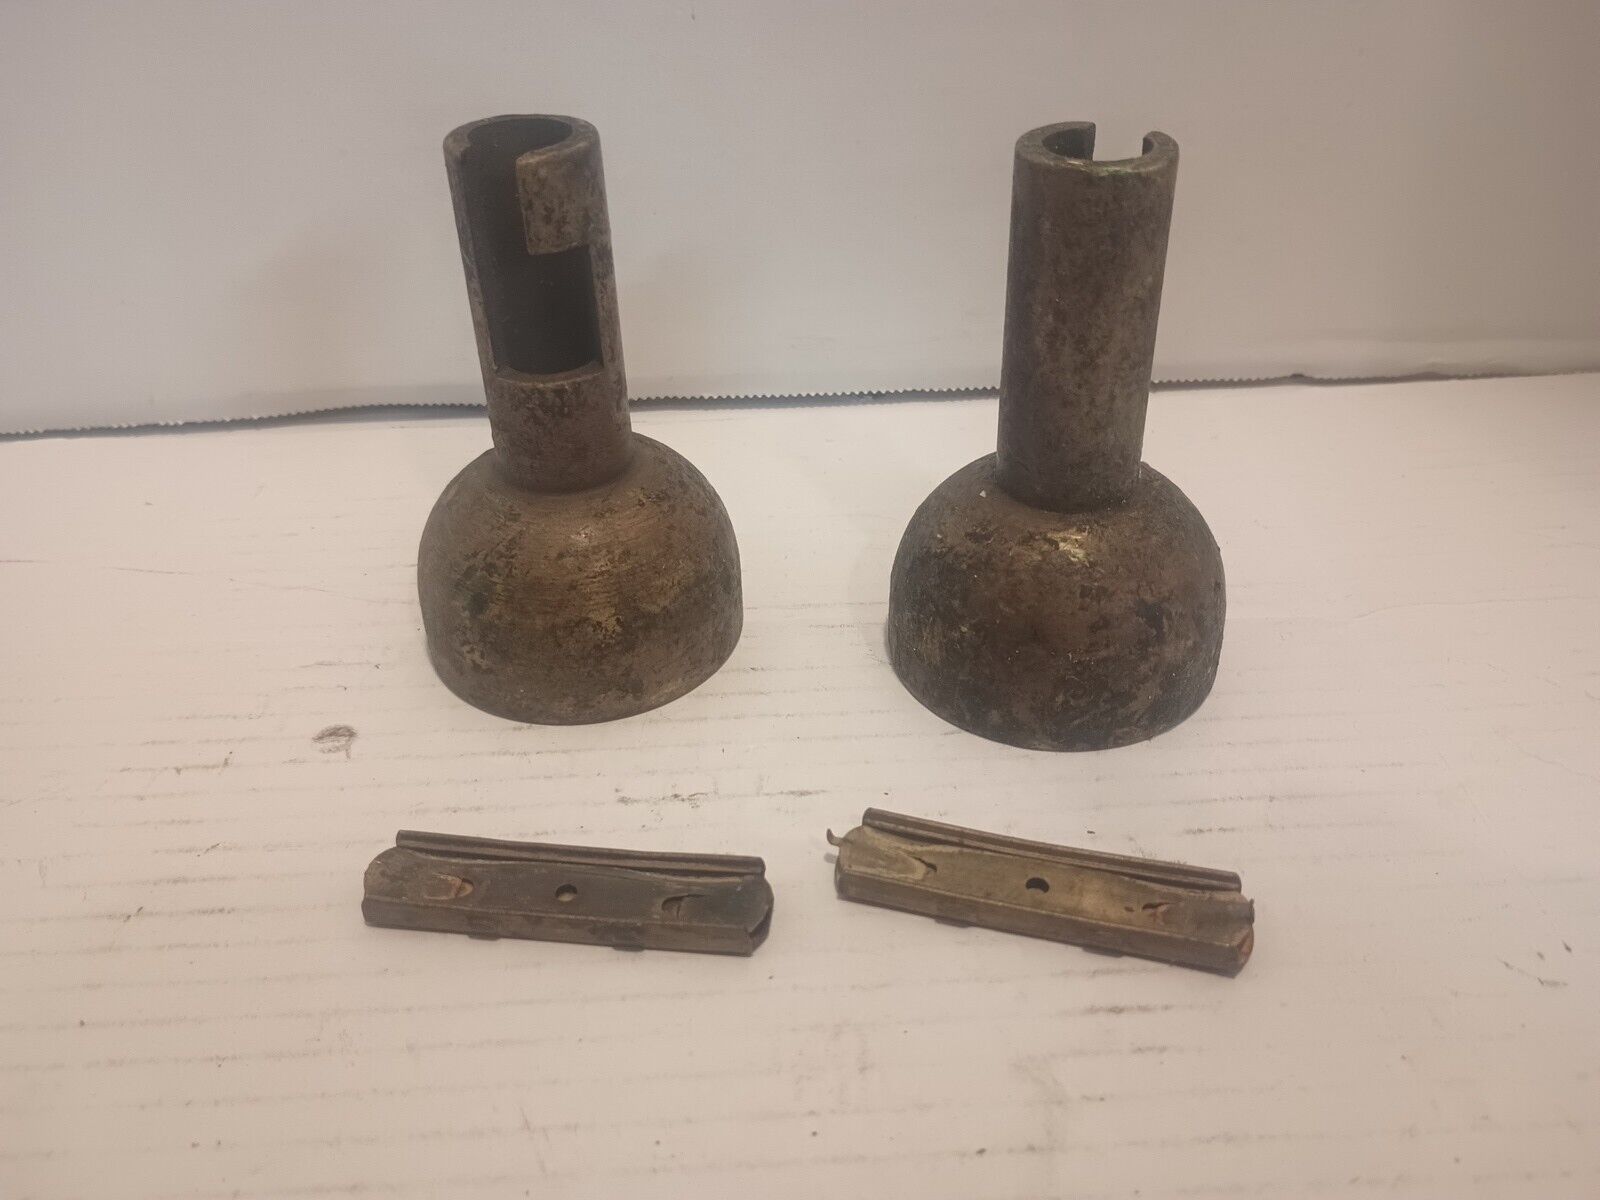 2 Turkish Mauser Rifle Oil Funnels & Two Stripper Clips